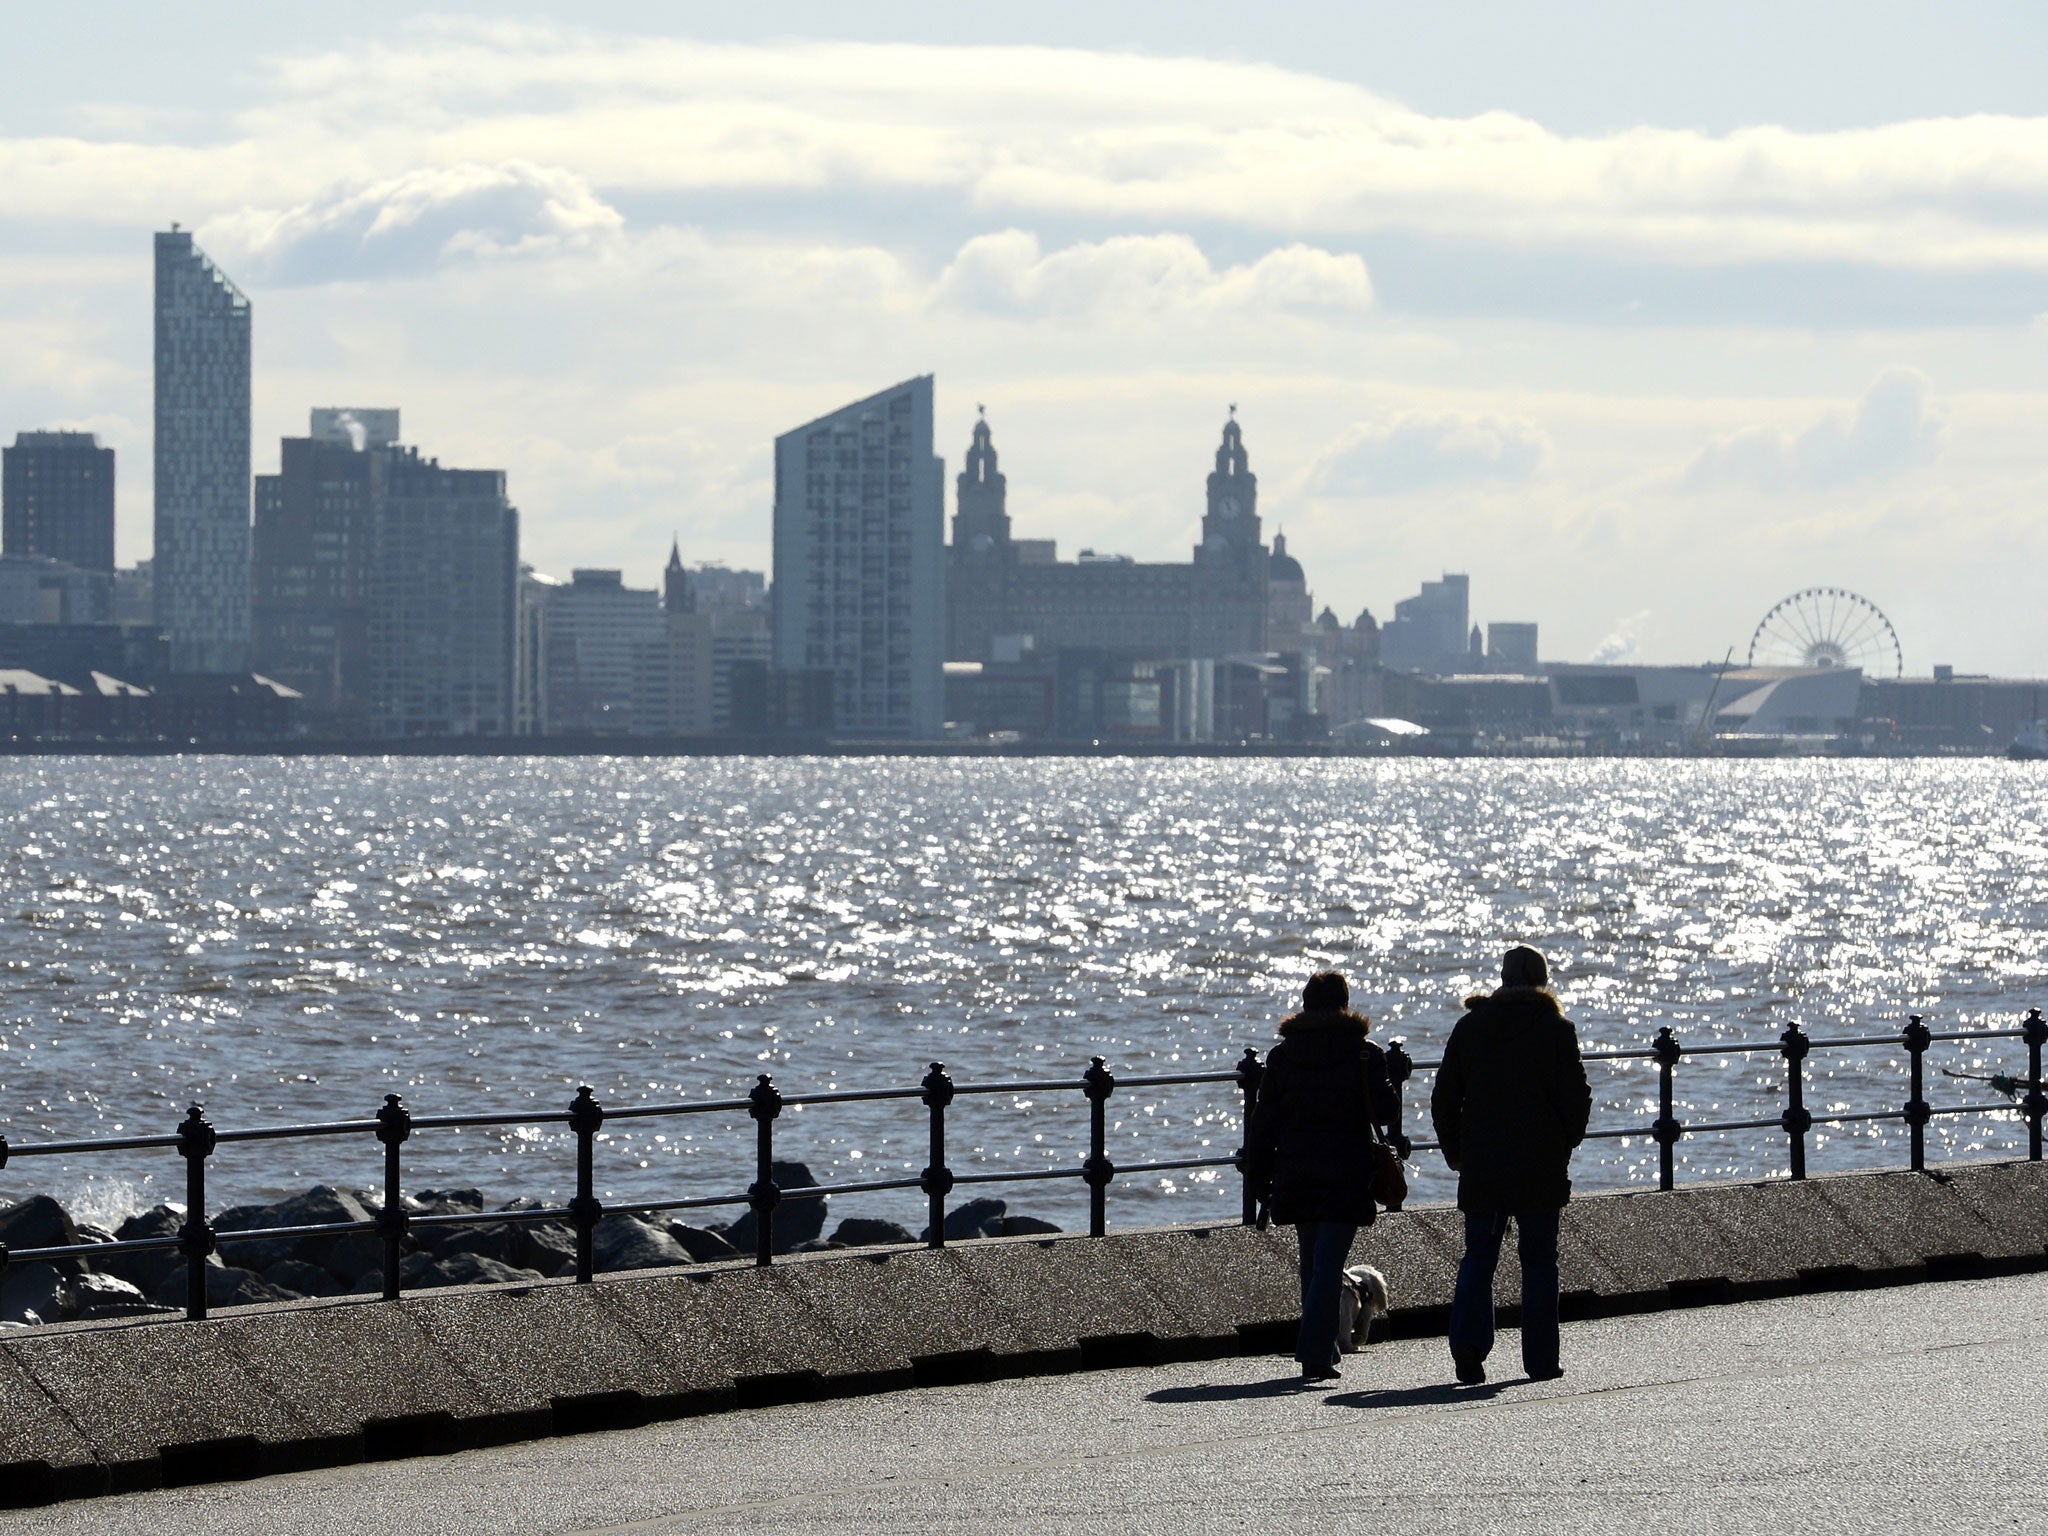 A toddler was rescued after falling into the River Mersey